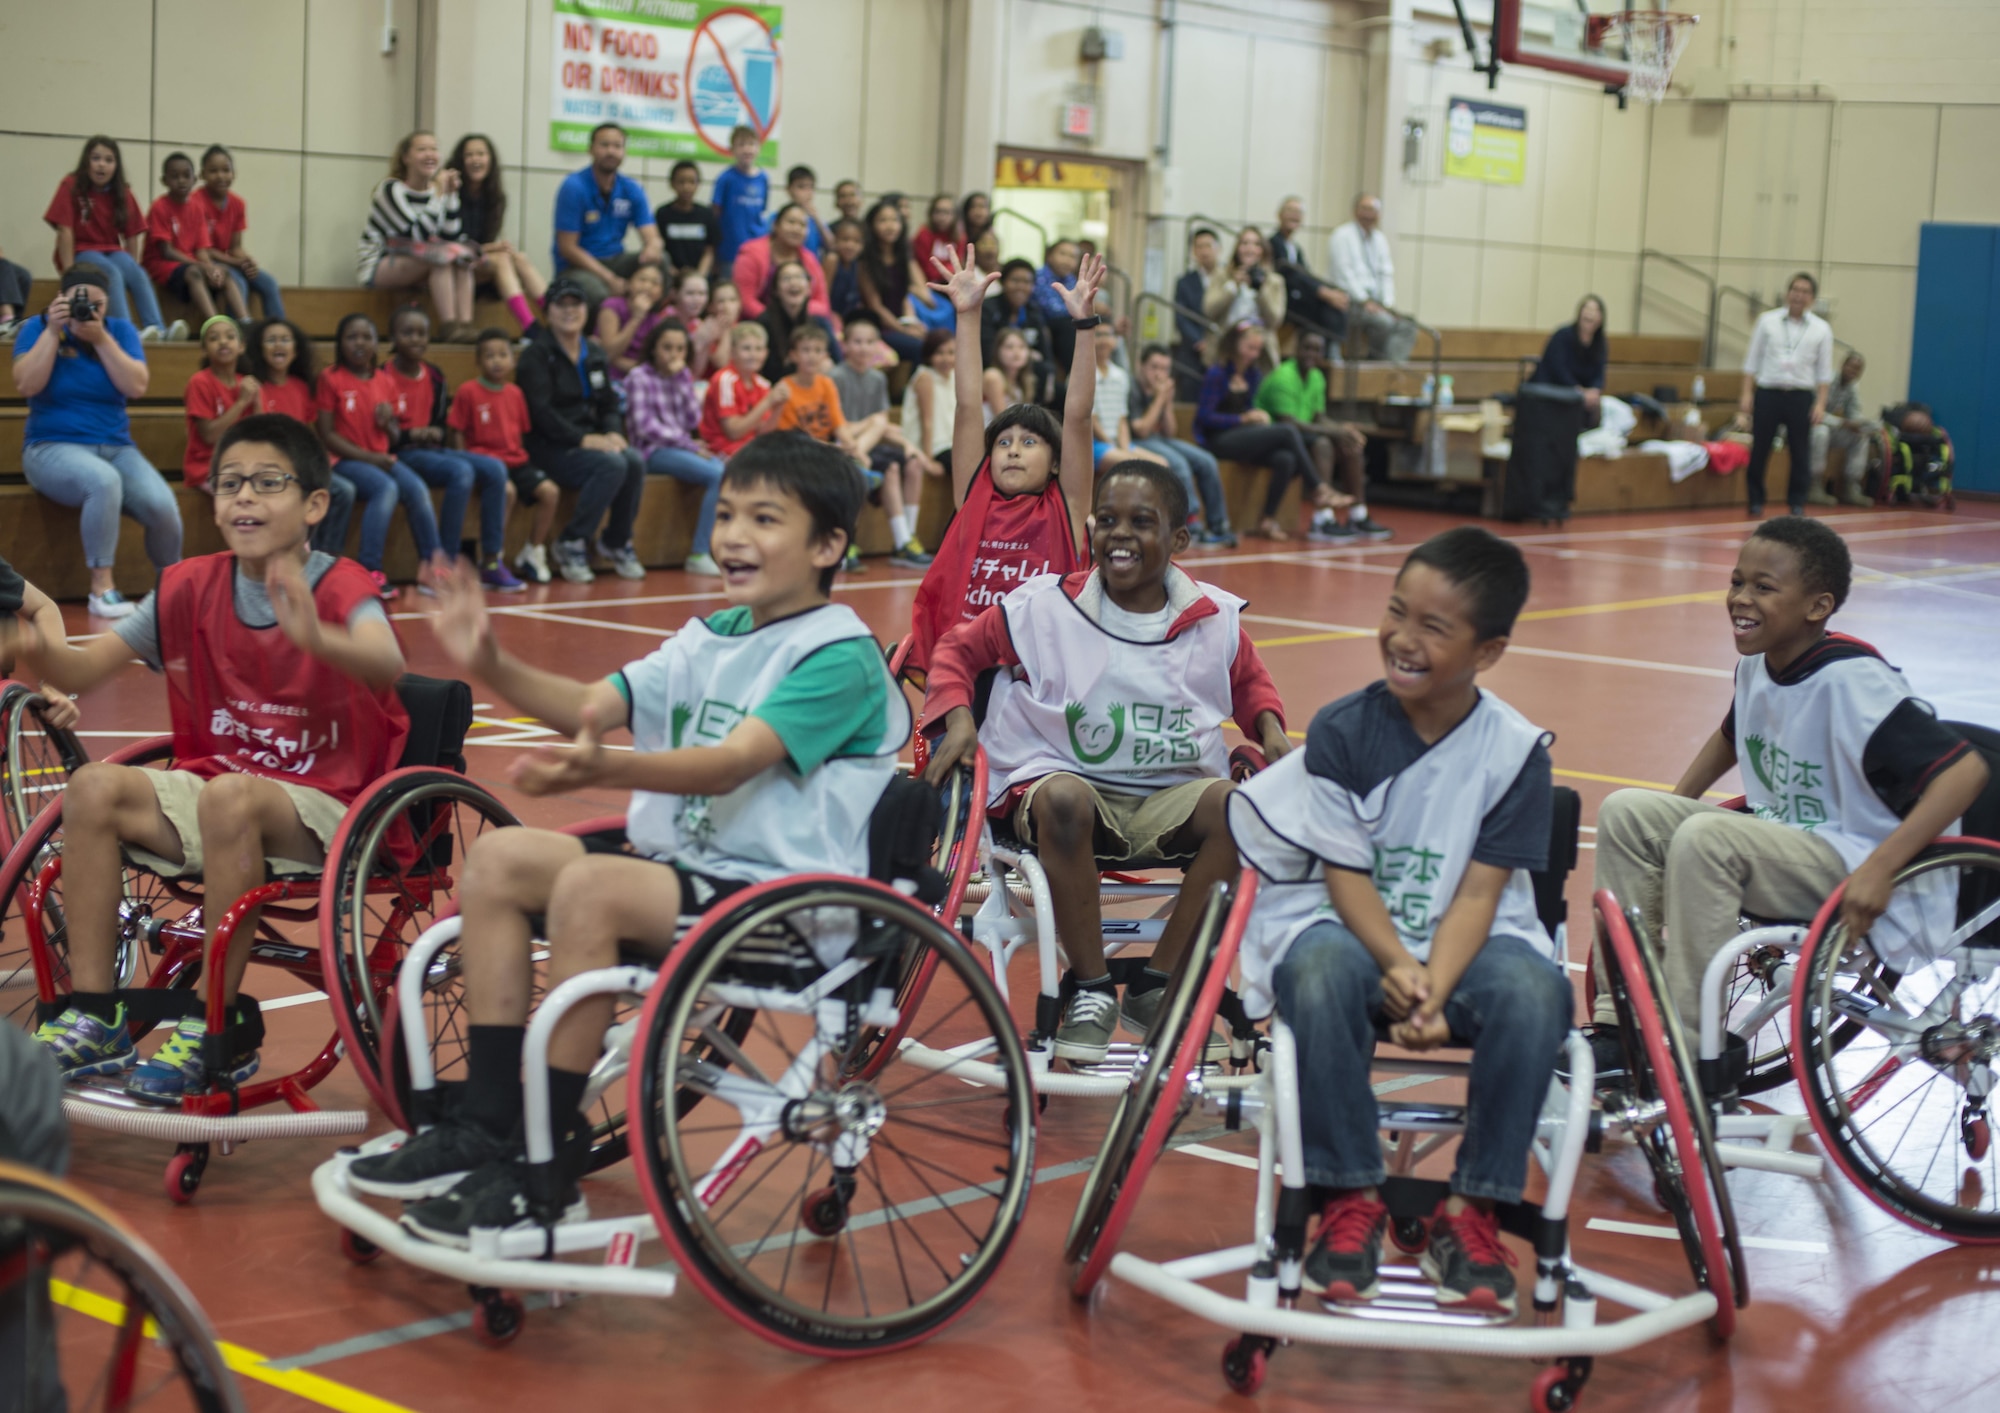 Children at the Lunney Youth Center play basketball in wheelchairs at Misawa Air Base, Japan, June 28, 2016. The children were able to experience the difficulties of being in a wheelchair firsthand, while being coached by Shinji Negi, the captain of the Japan Men's National Wheelchair Basketball Team at the 2000 Sydney Paralympic Games. (U.S. Air Force photo by Senior Airman Brittany A. Chase)